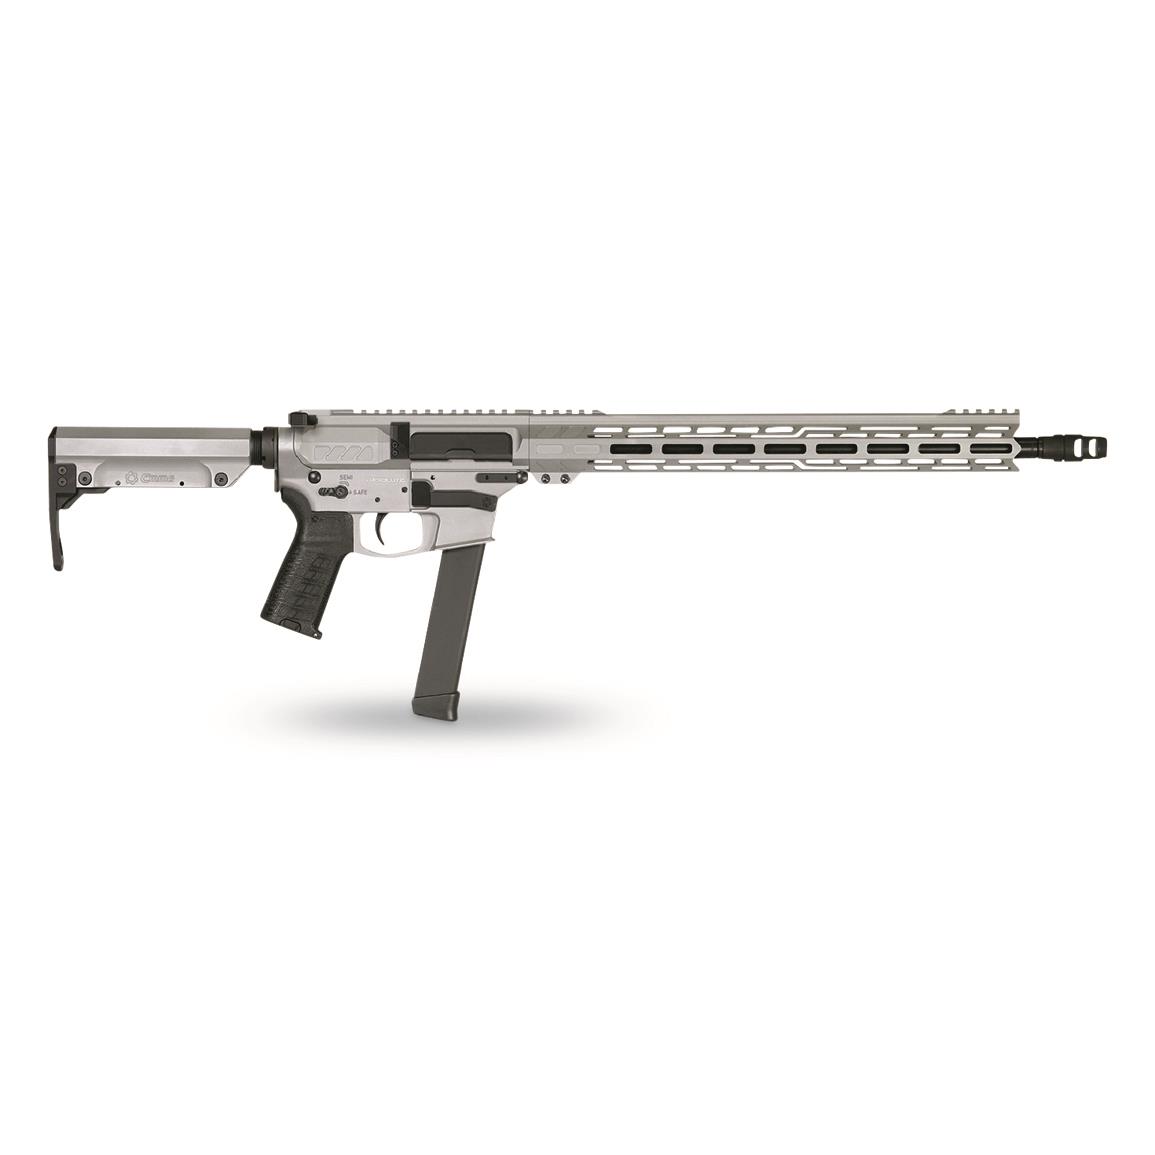 CMMG Resolute MkGs PCC, Semi-automatic, 9mm, 16.1" Barrel, 32+1 Rounds, Accepts Glock Mags